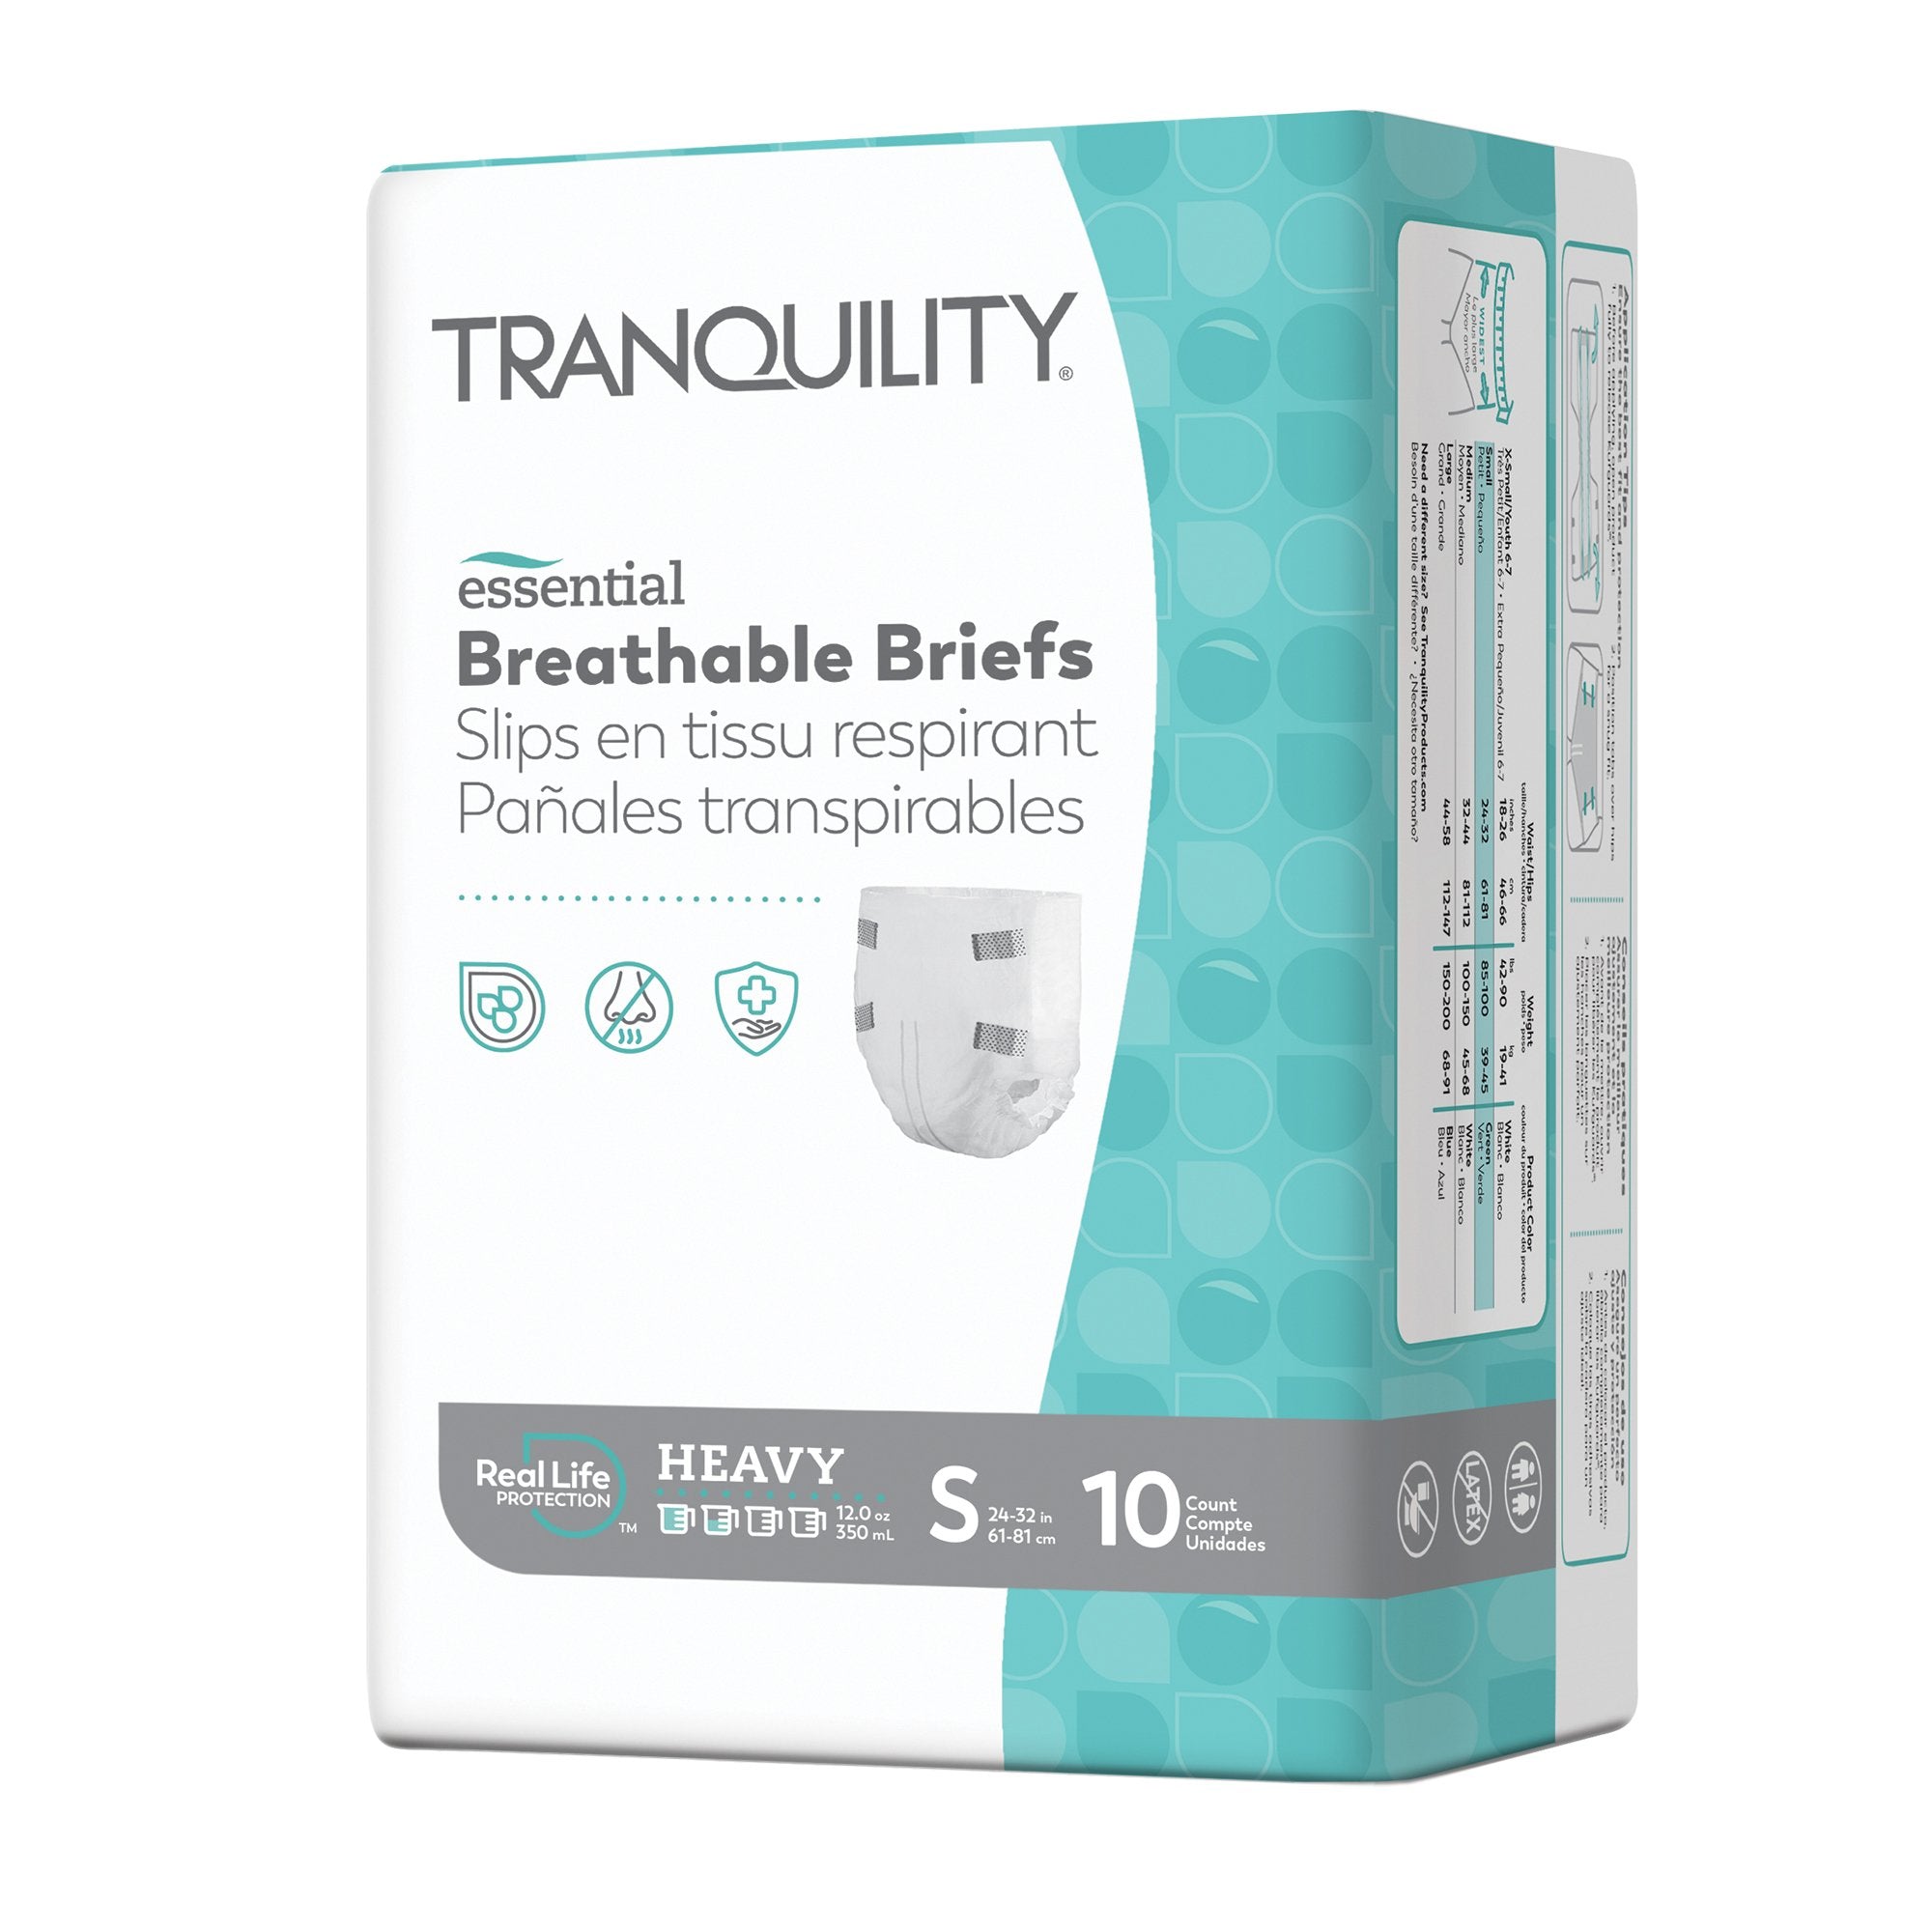 Unisex Adult Incontinence Brief Tranquility Essential Small Disposable Heavy Absorbency